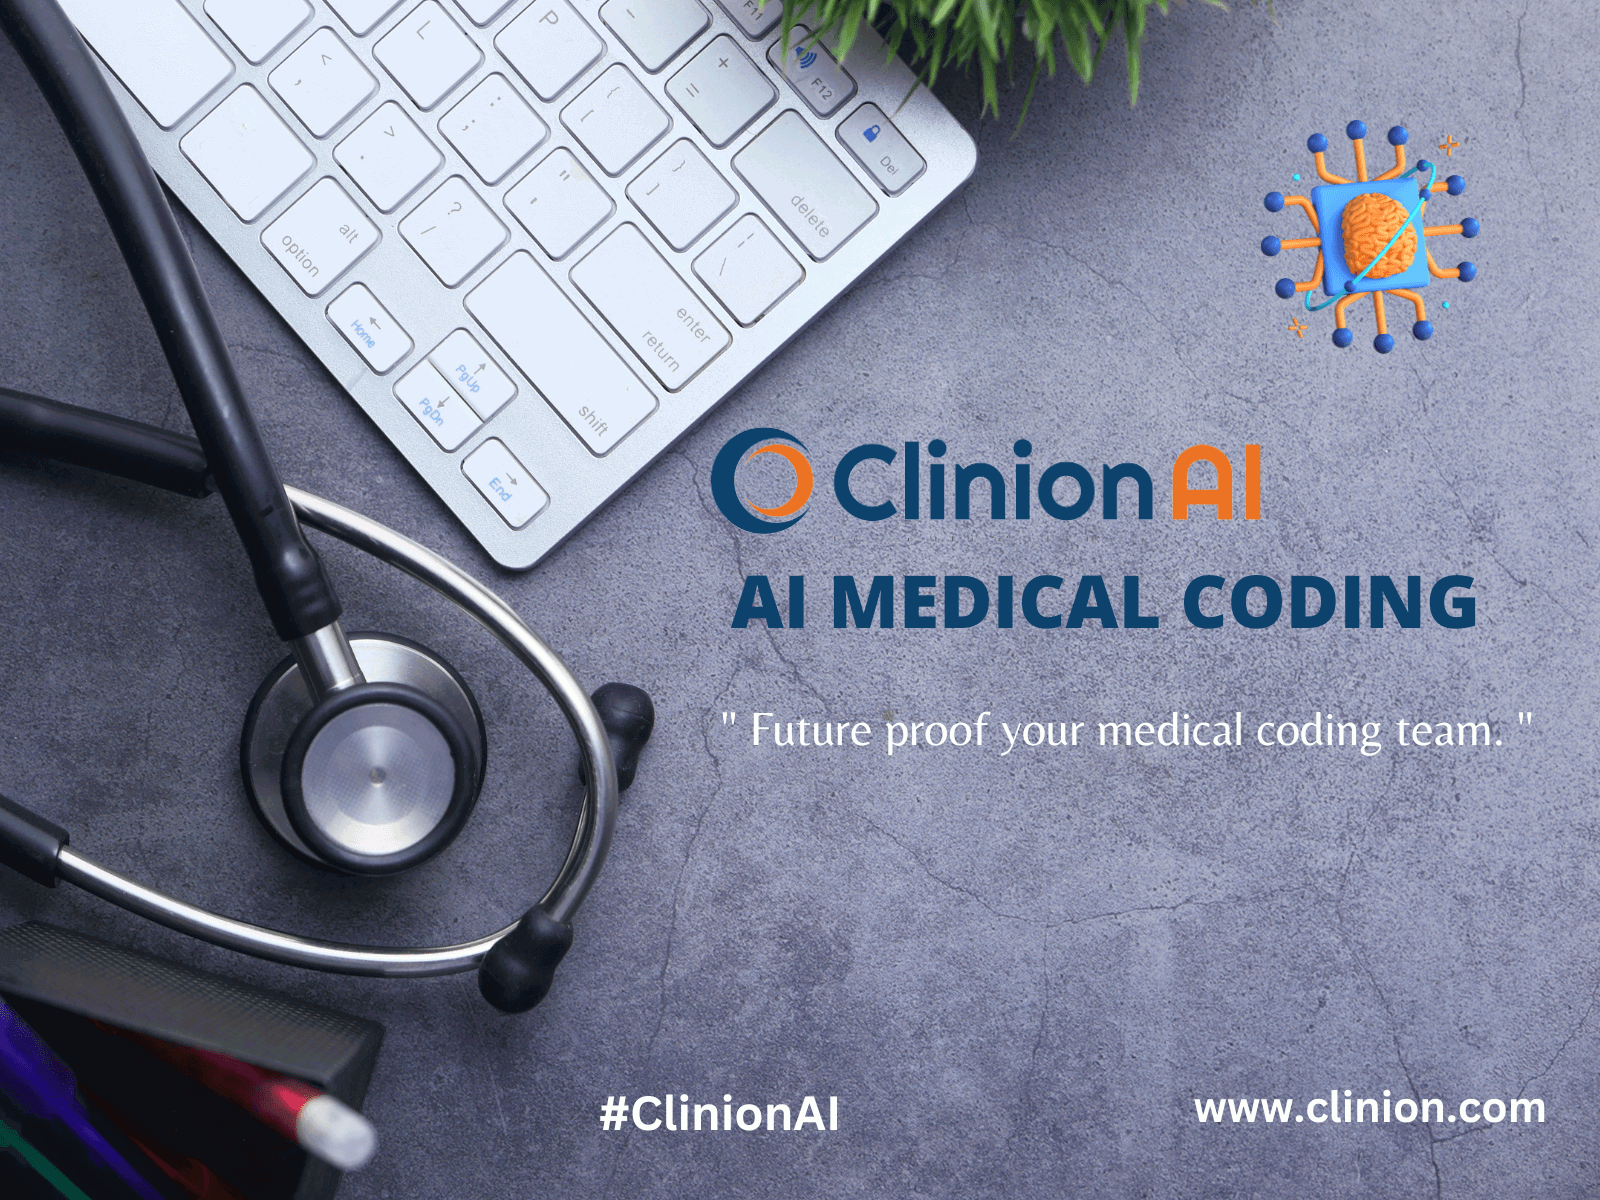 Fully automated AI-enabled, Medical Coding software to help your team work faster and smarter